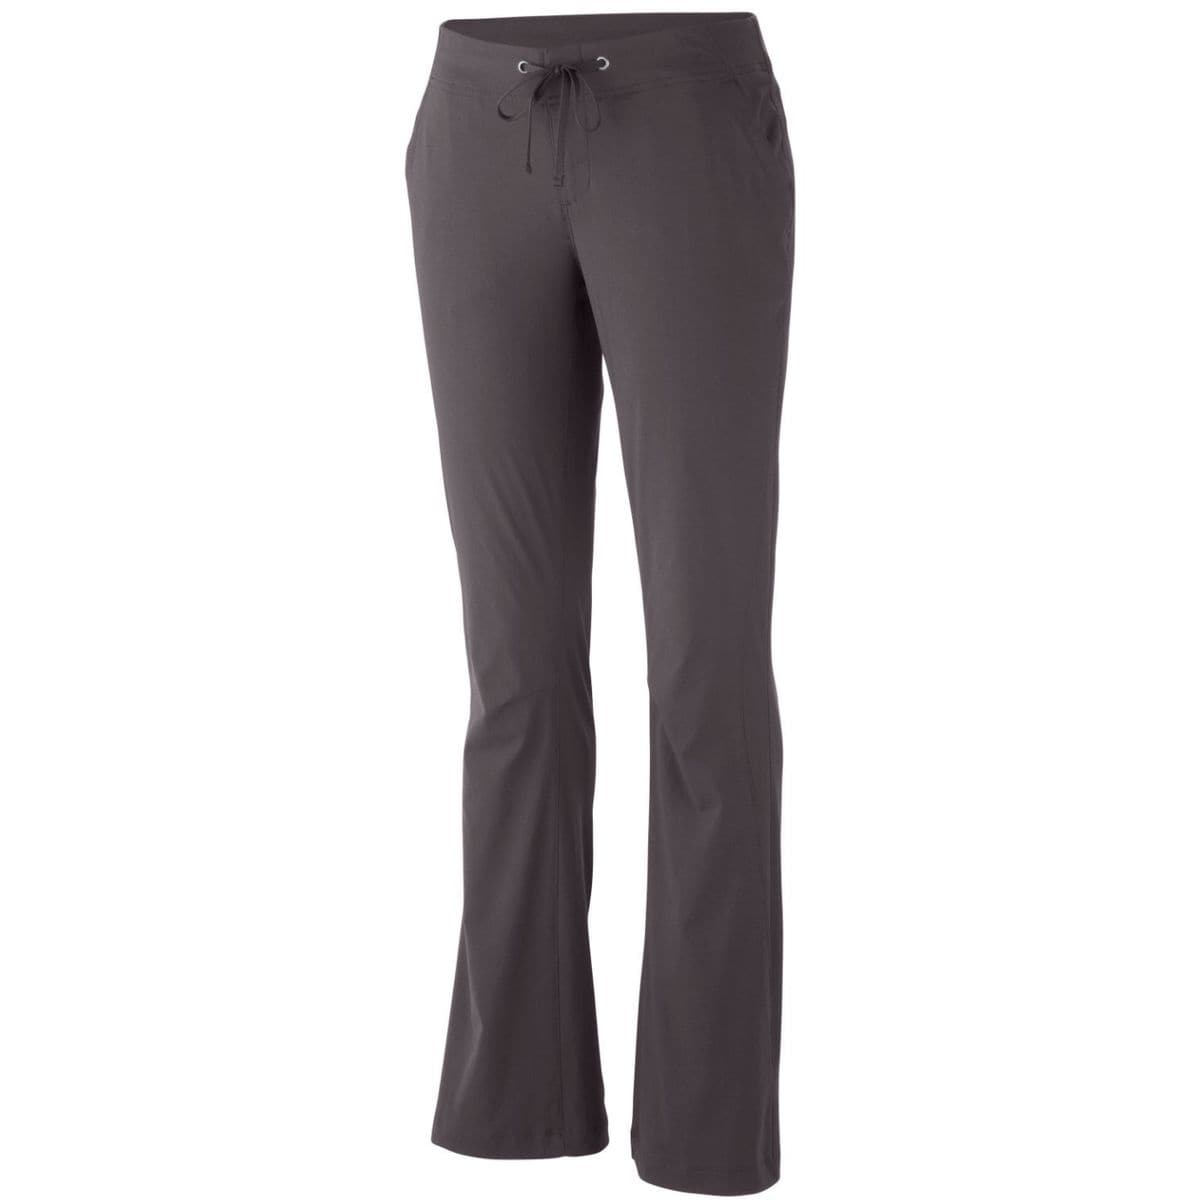 Anytime Outdoor Boot Cut Pant - Women